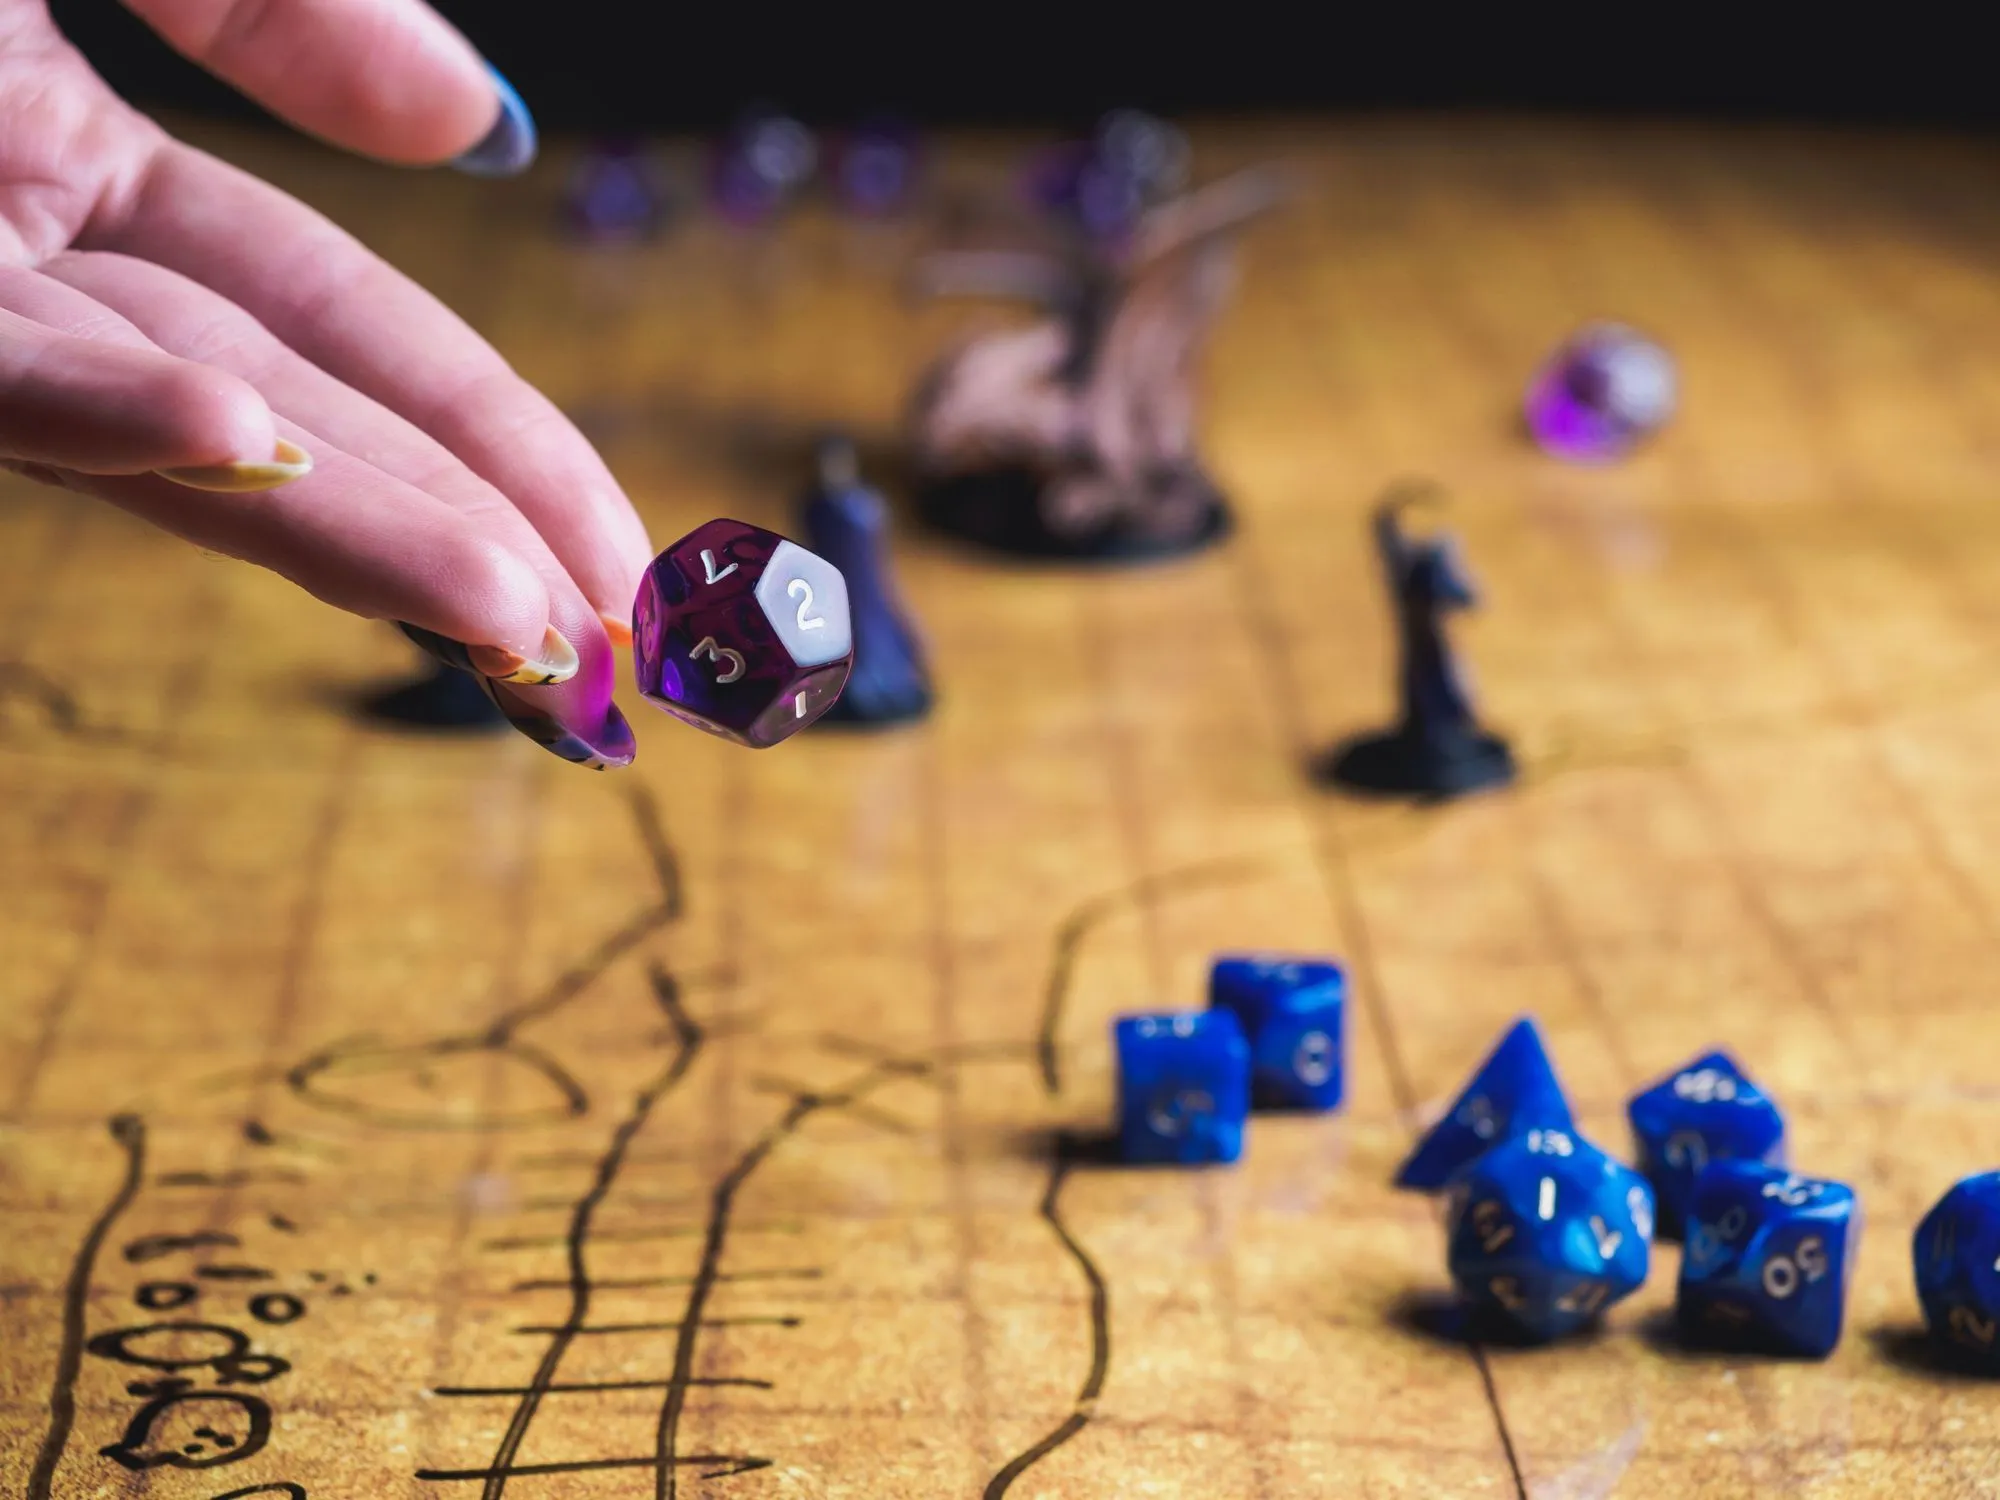 A woman throwing the purple dice while playing Dungeons and Dragons board game